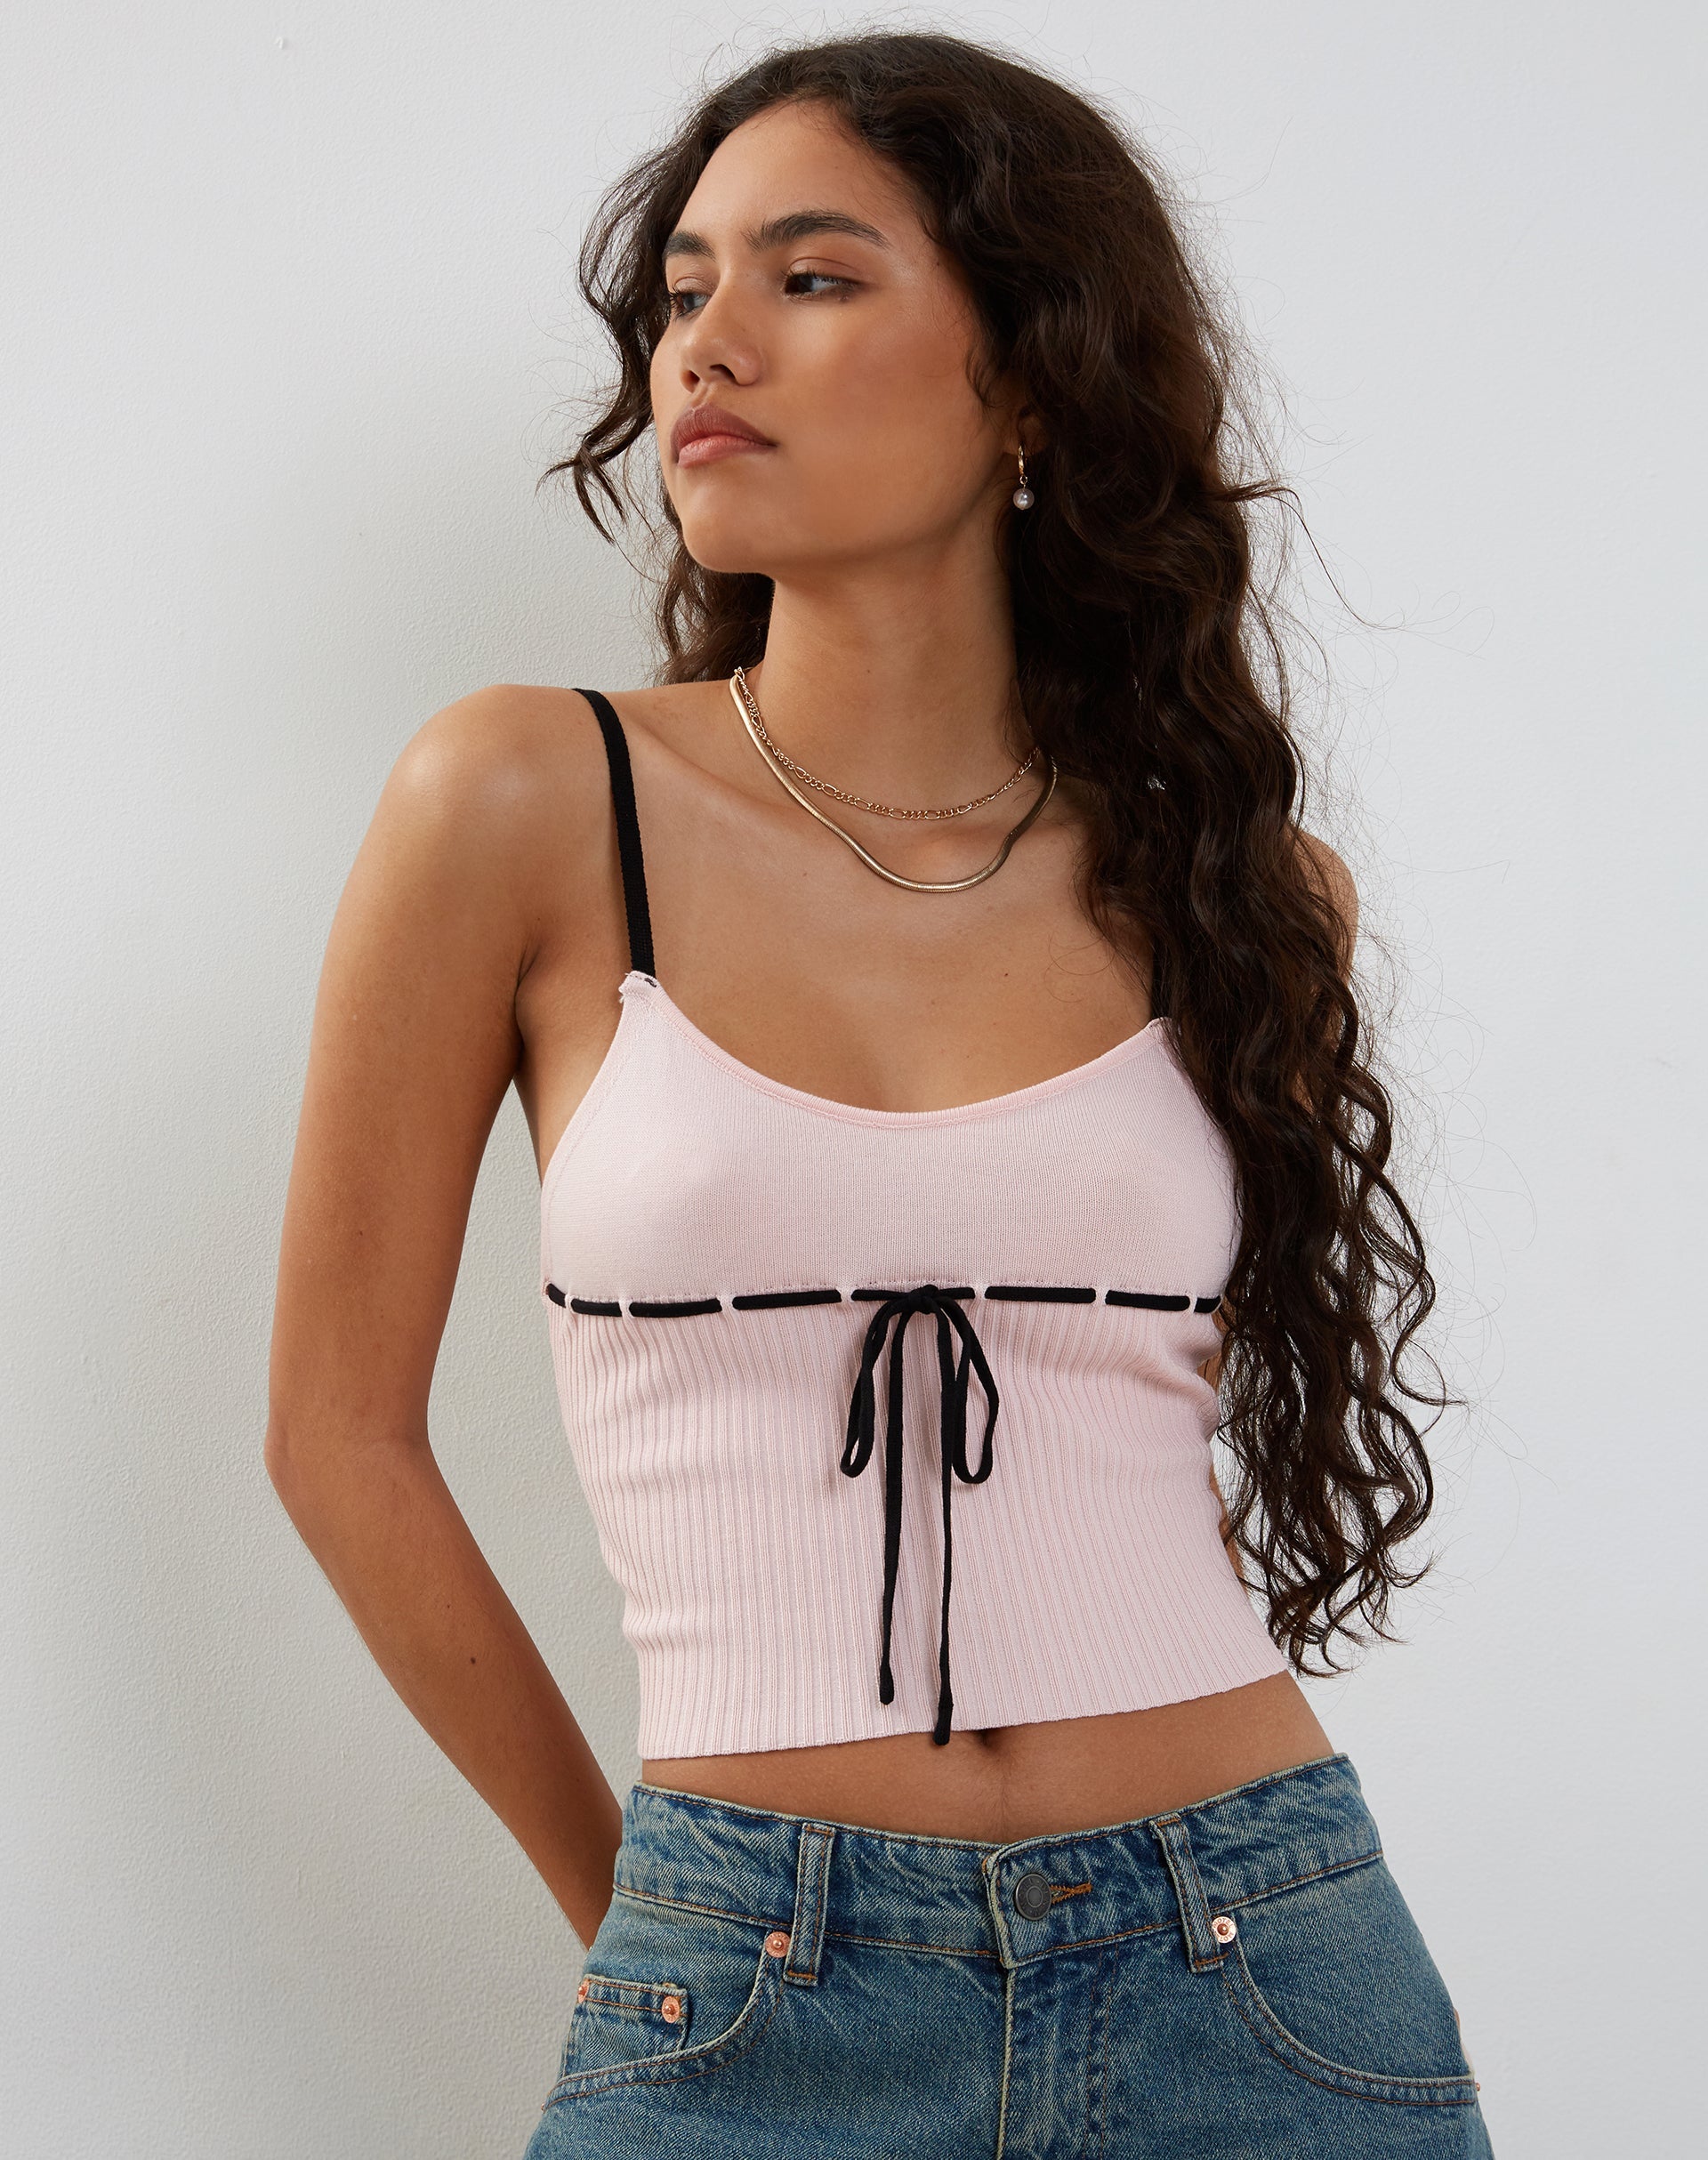 Pink Cami  Forever 21